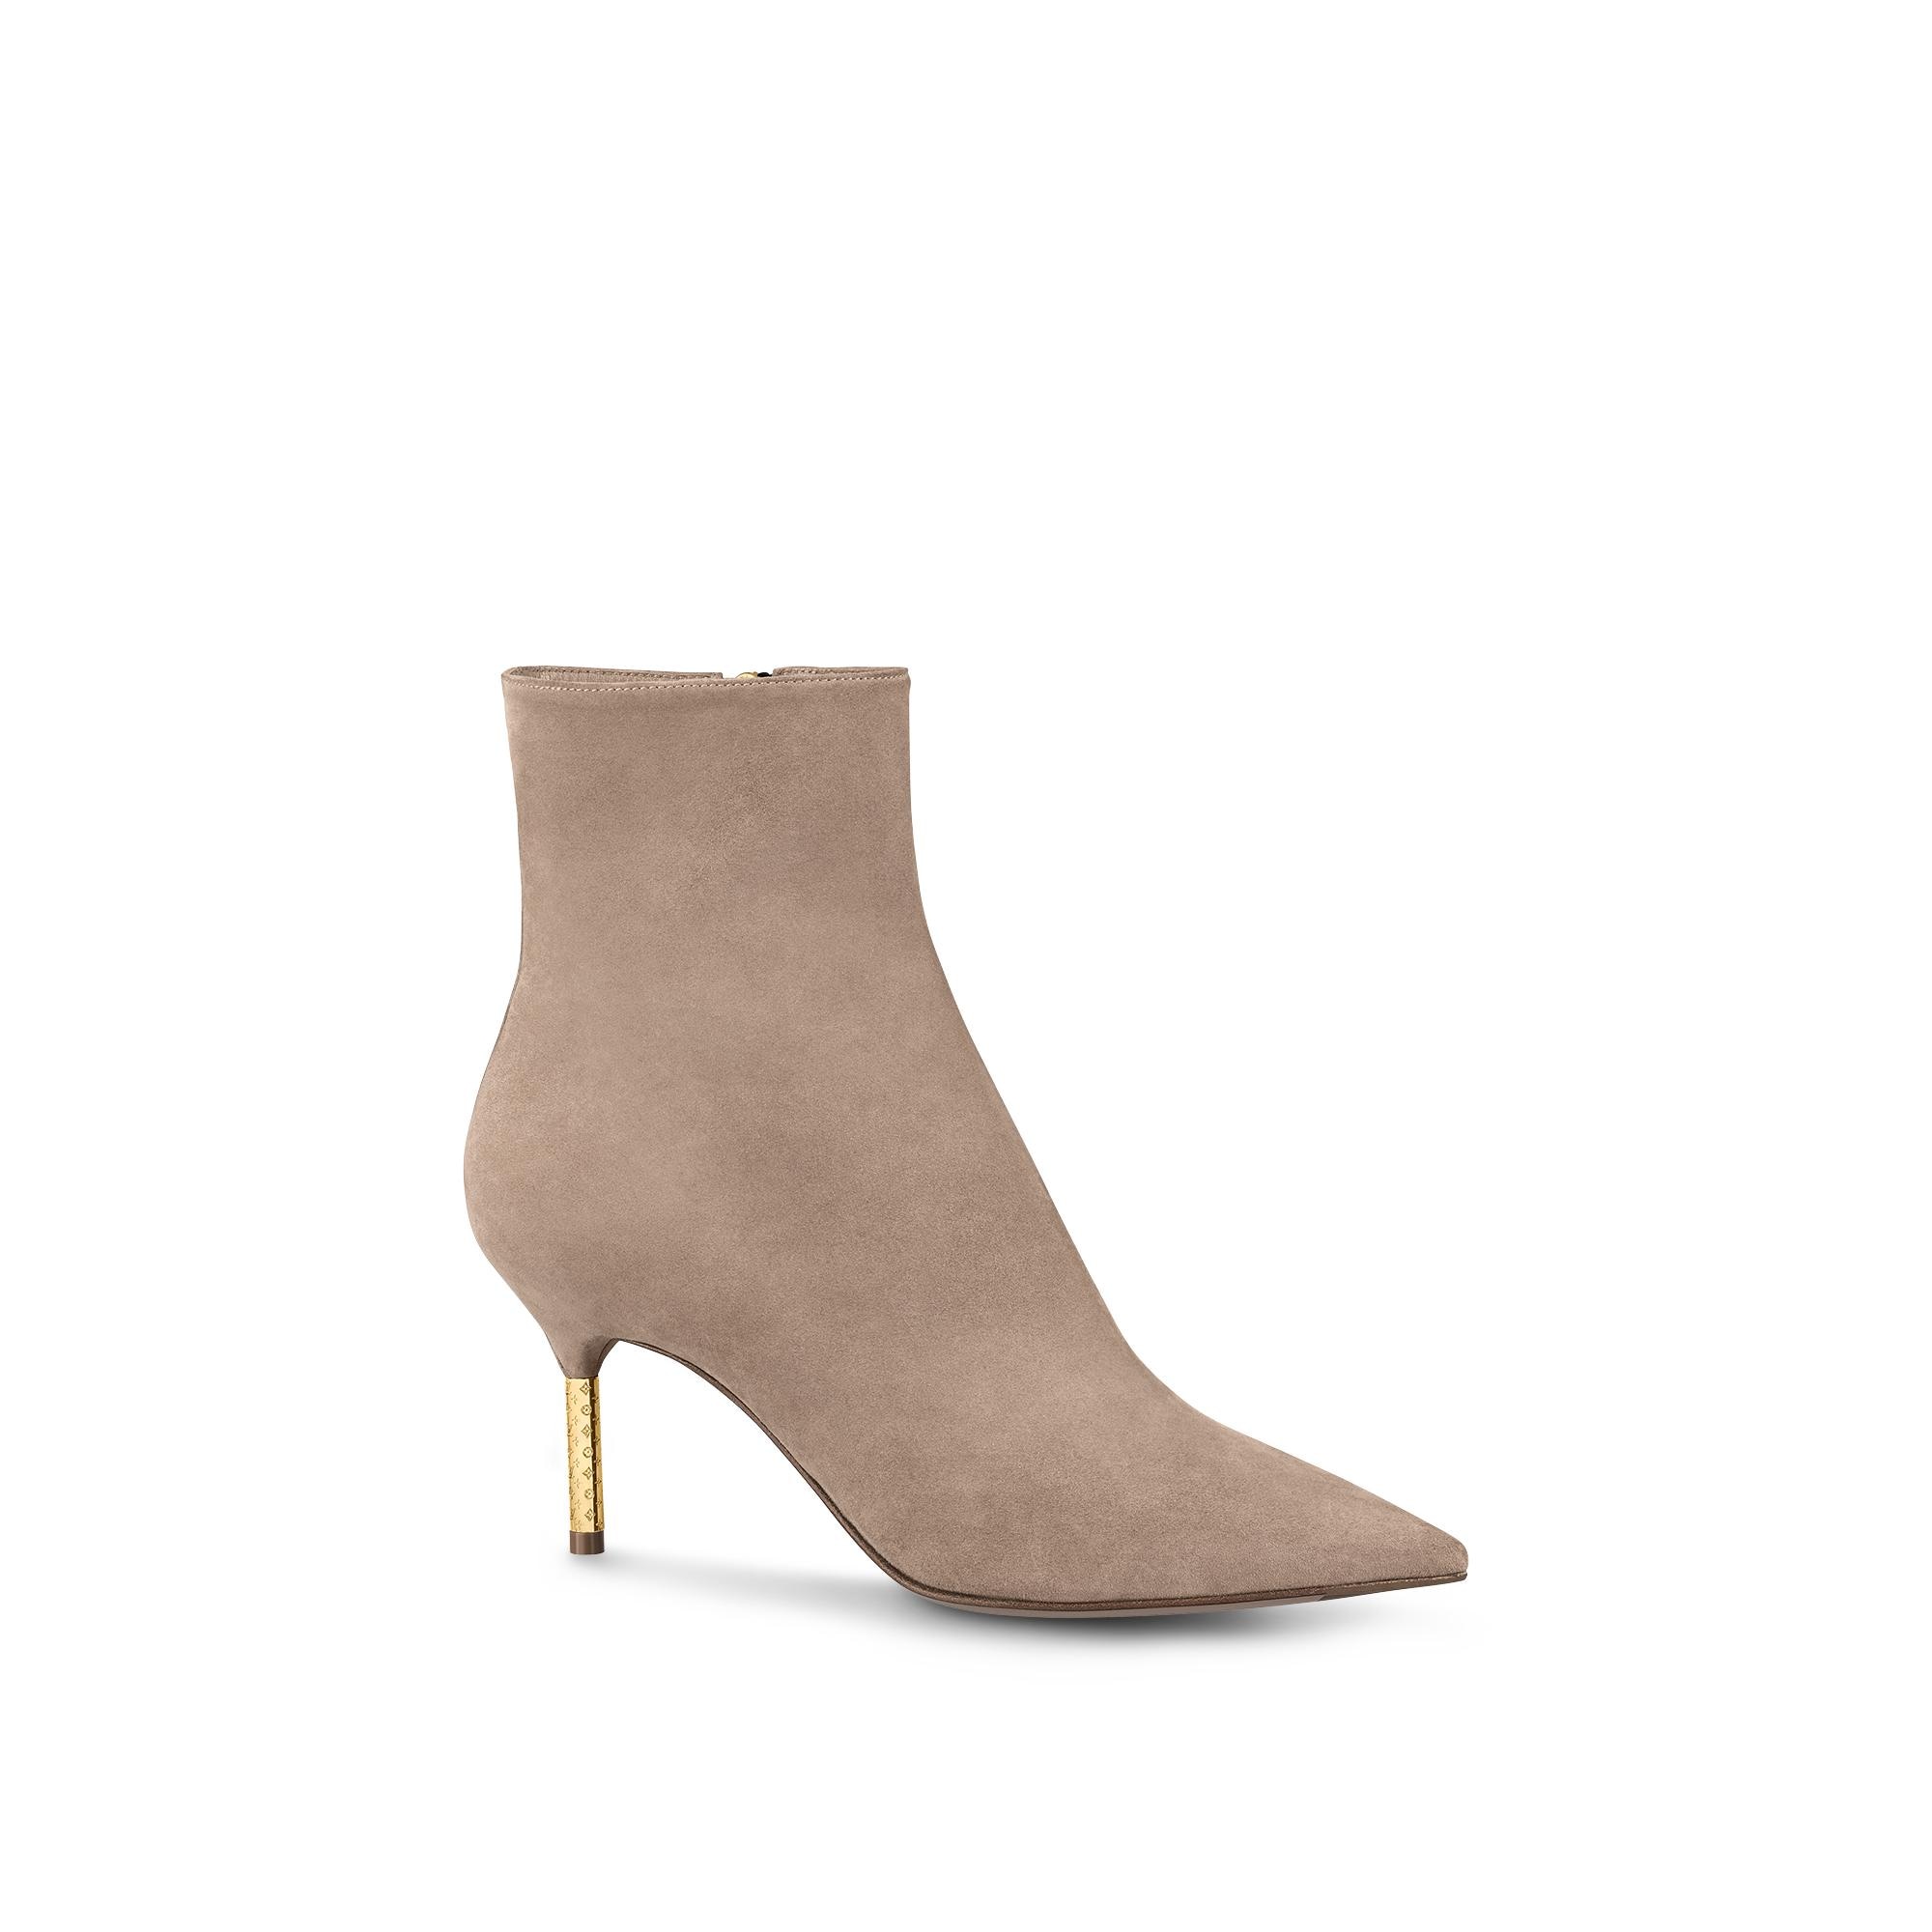 Louis Vuitton Ultimate Ankle Boot in Beige - Shoes 1A950O